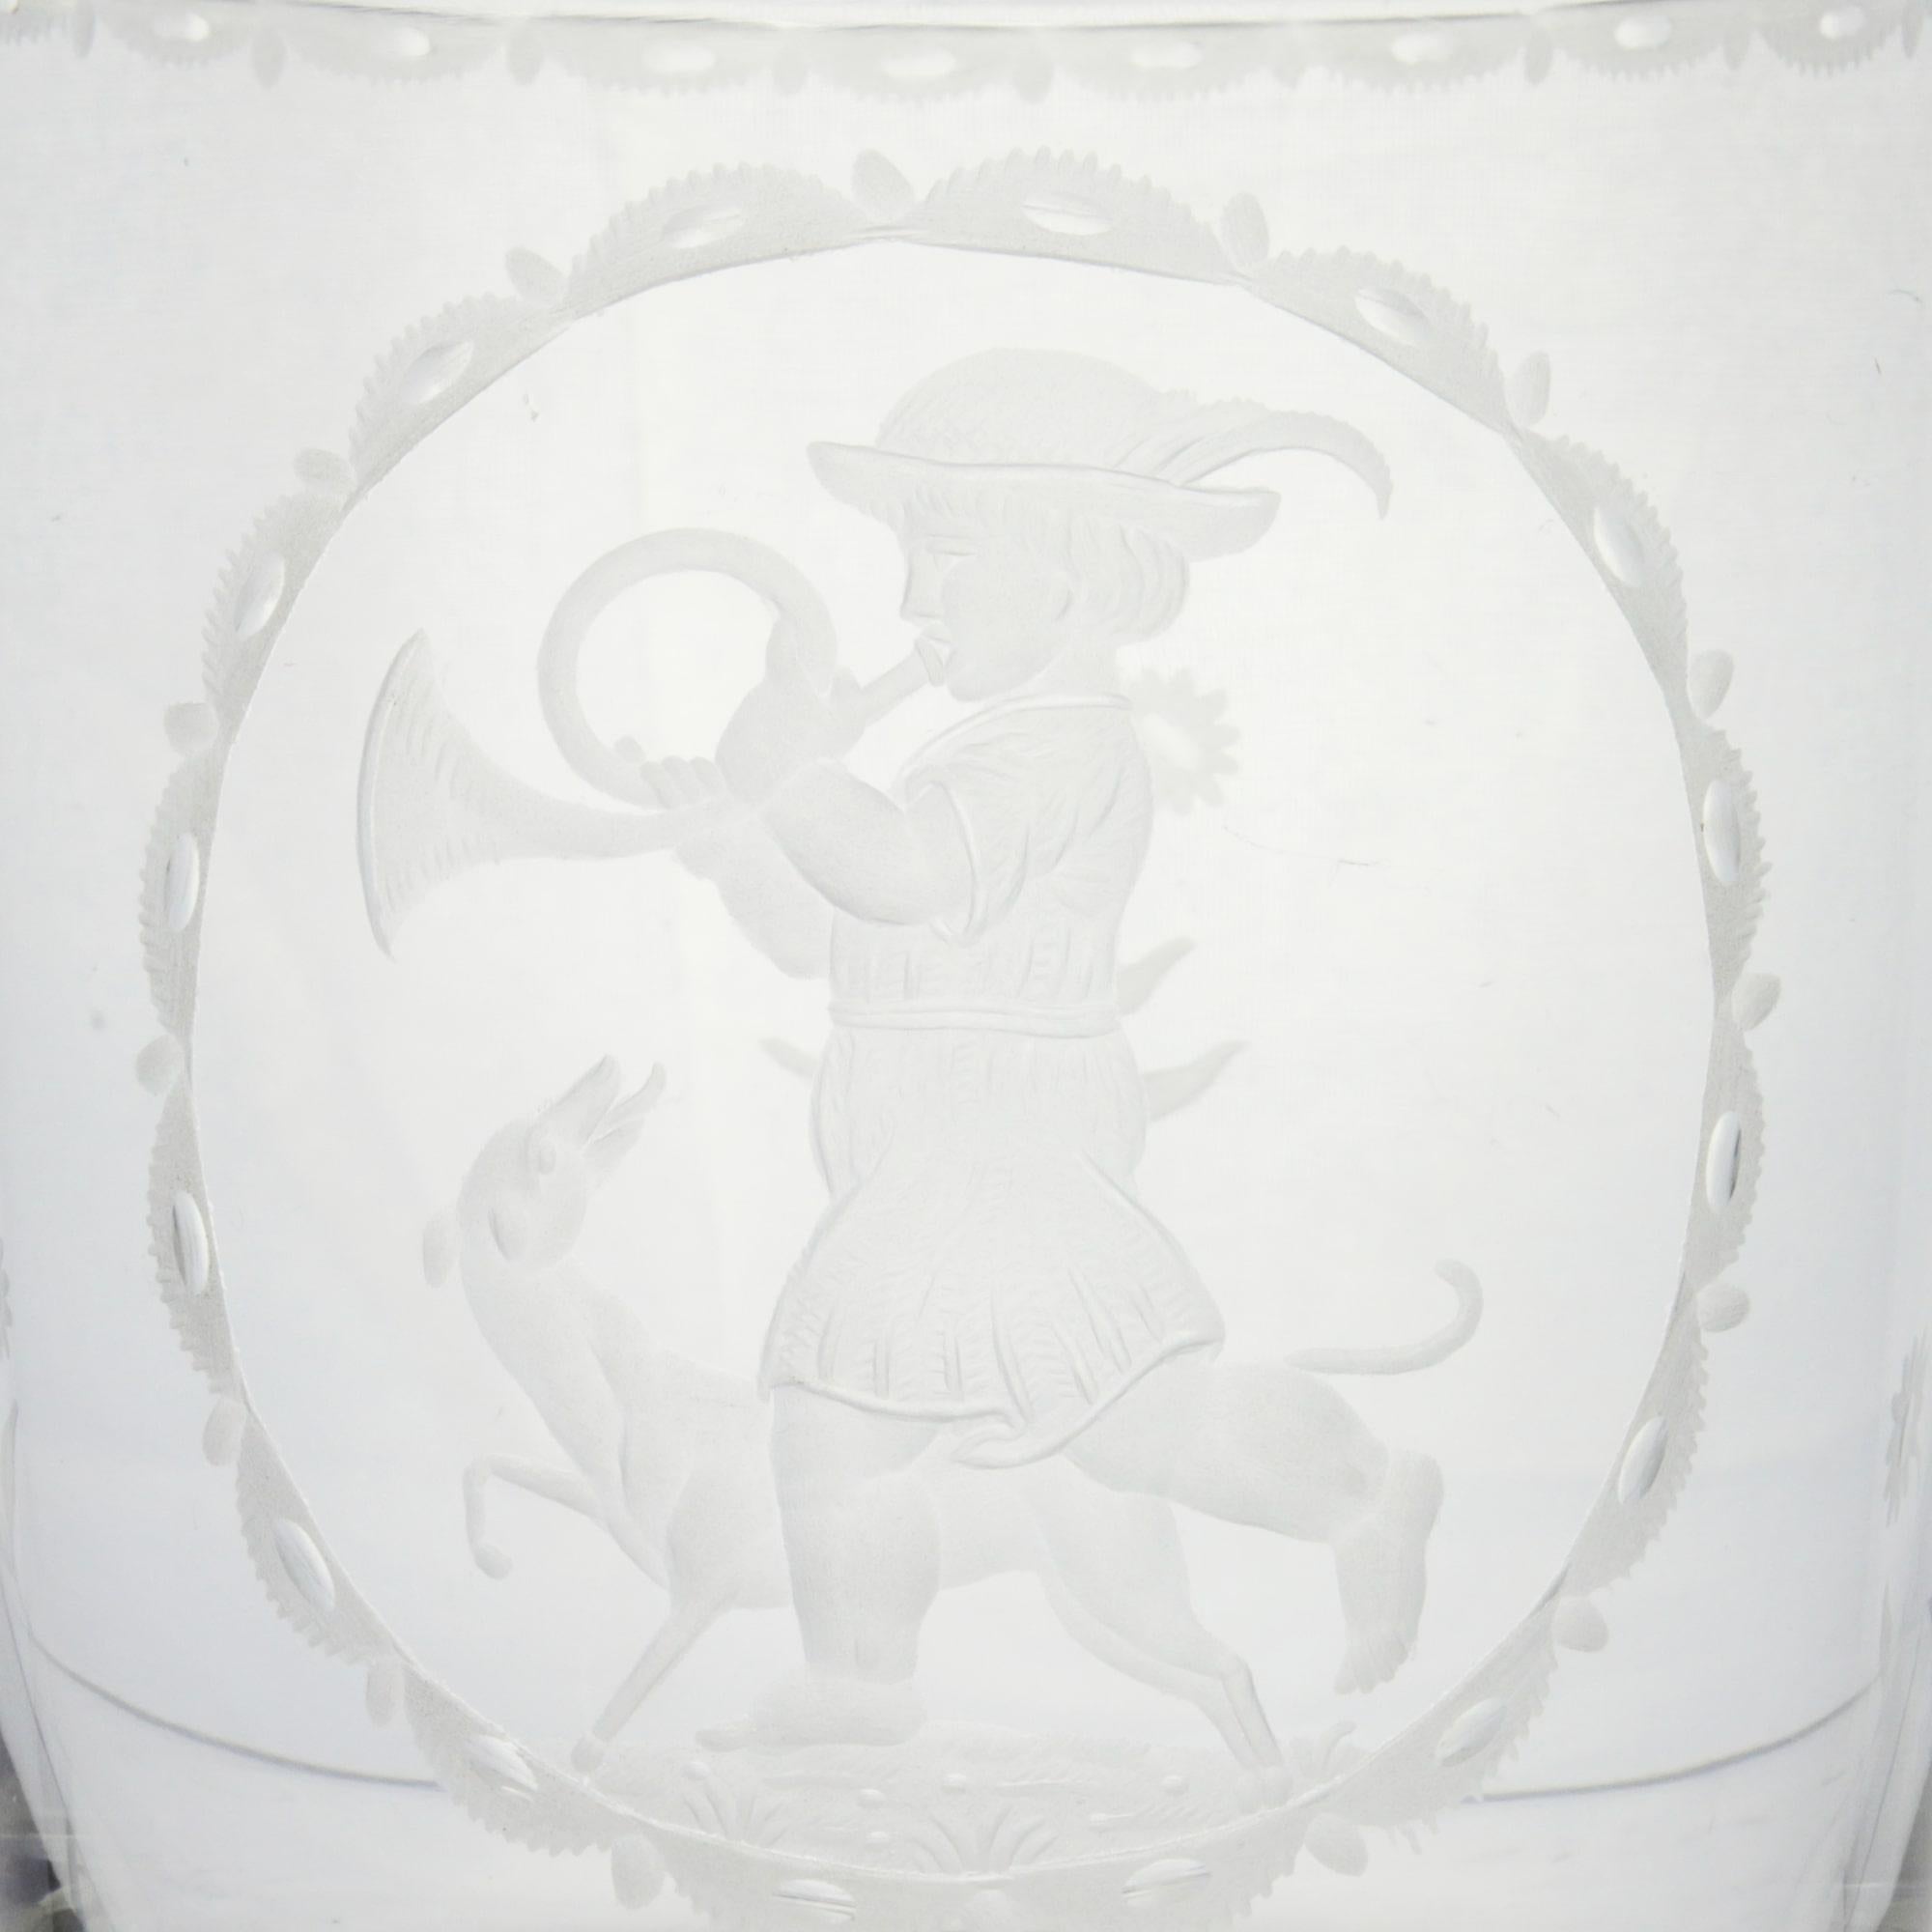 A very fine etched glass beaker designed by Michael Powolny (1871-1954) for Lobmeyr of Vienna. The piece depicts a boy with a horn and a dog inside an etched medallion, representing the month of November. The design dates to circa 1913-1914, and was